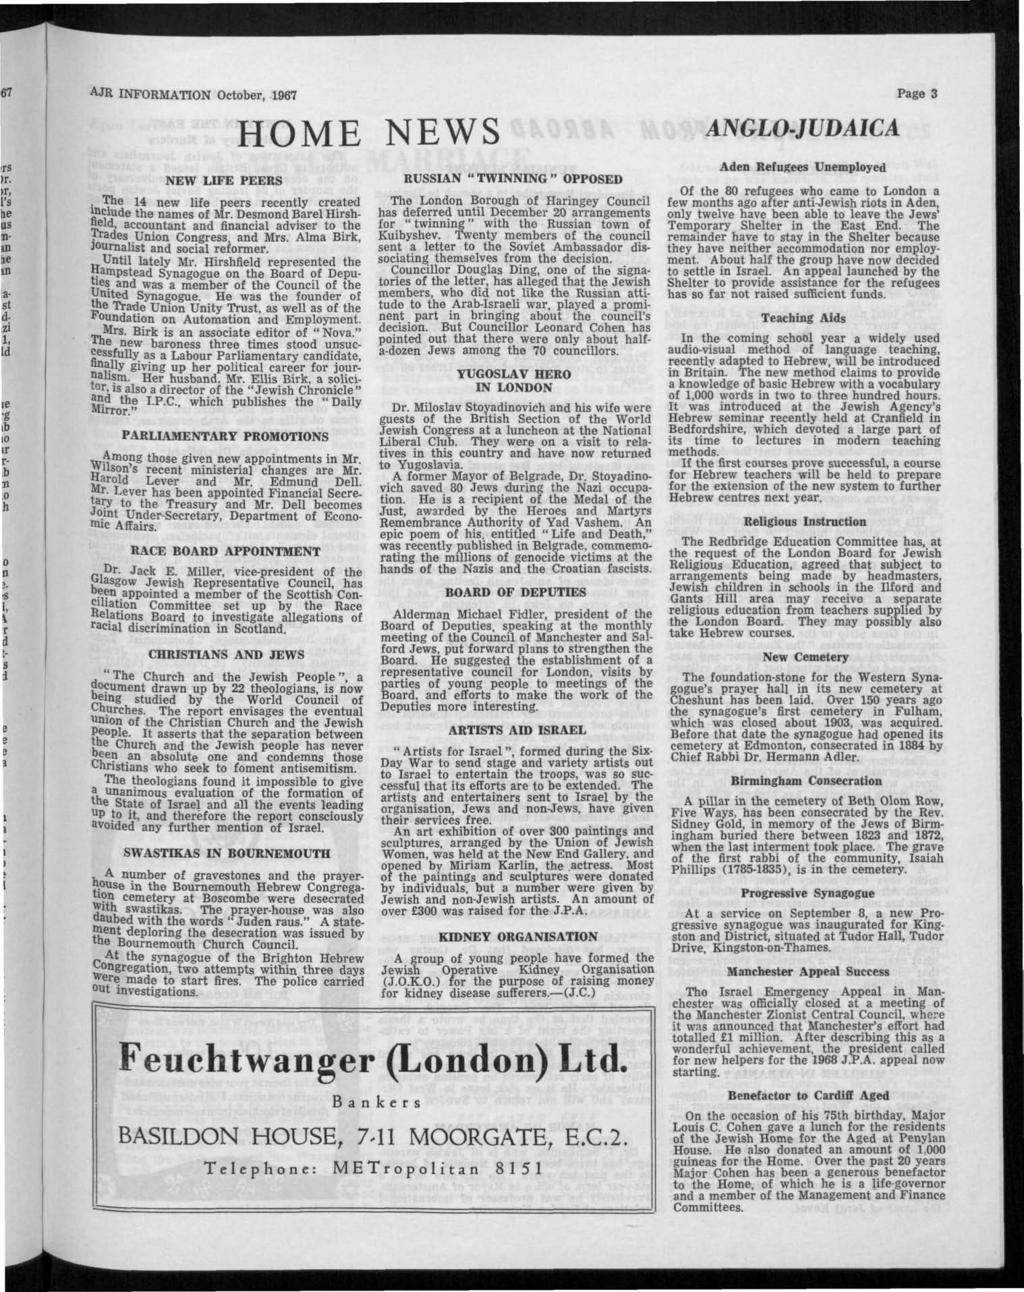 AJR INFORMA'nON October, 1967 Page 3 HOME NEWS NEW LIFE PEERS. "The 14 new Ufe peers recently created include the names of Mr.